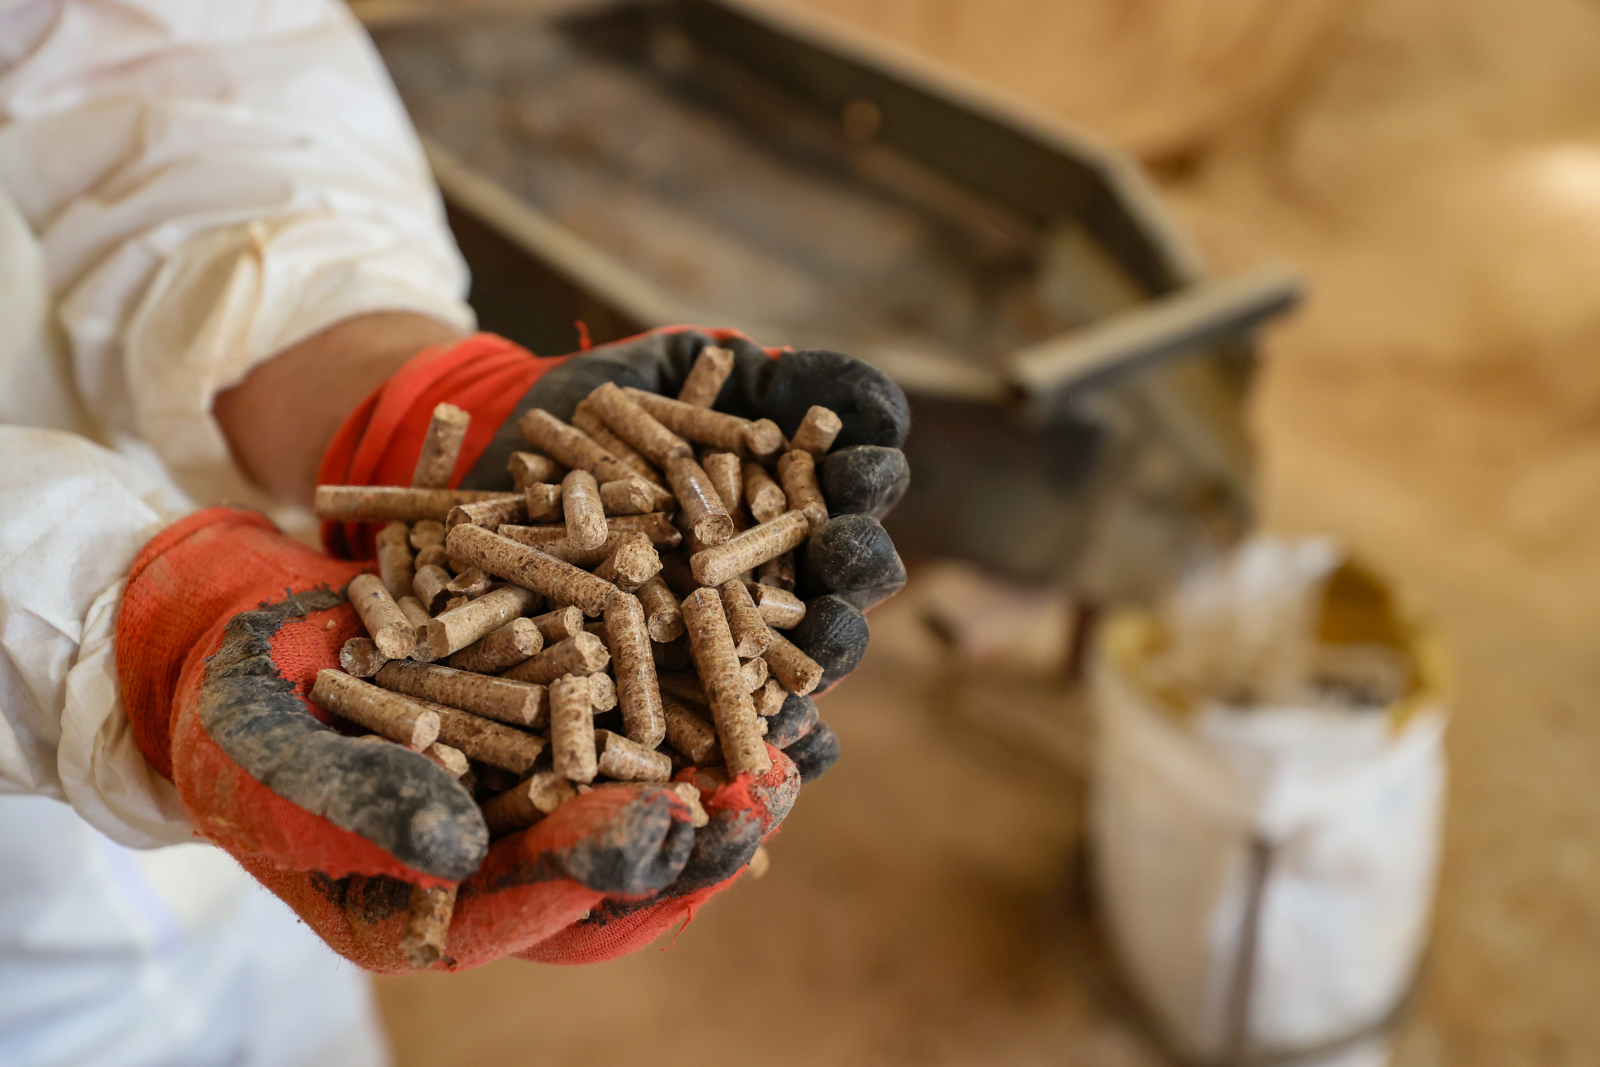 A person wearing red and black gloves holds a pile of brown, wooden pellets in their hands.